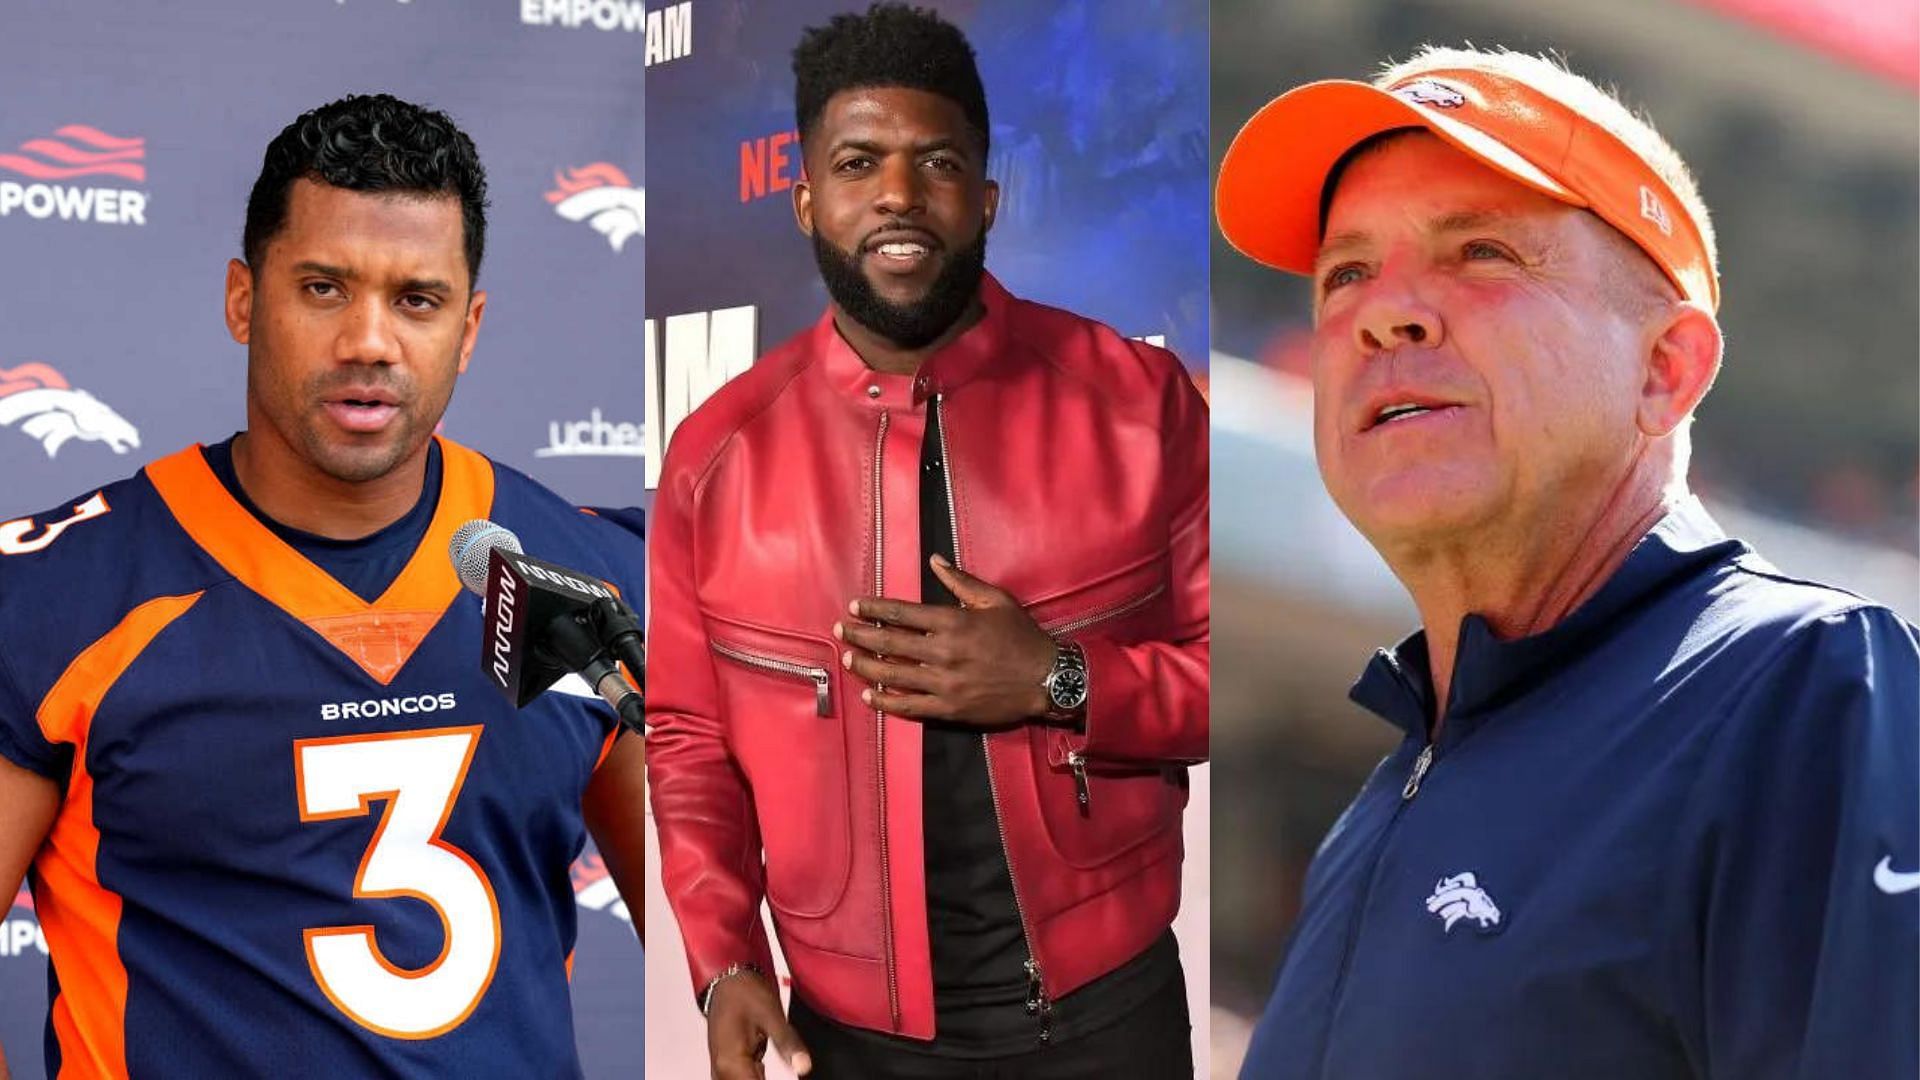  Emmanuel Acho (c) blames Broncos for unsuccessful season with Russell Wilson (l)